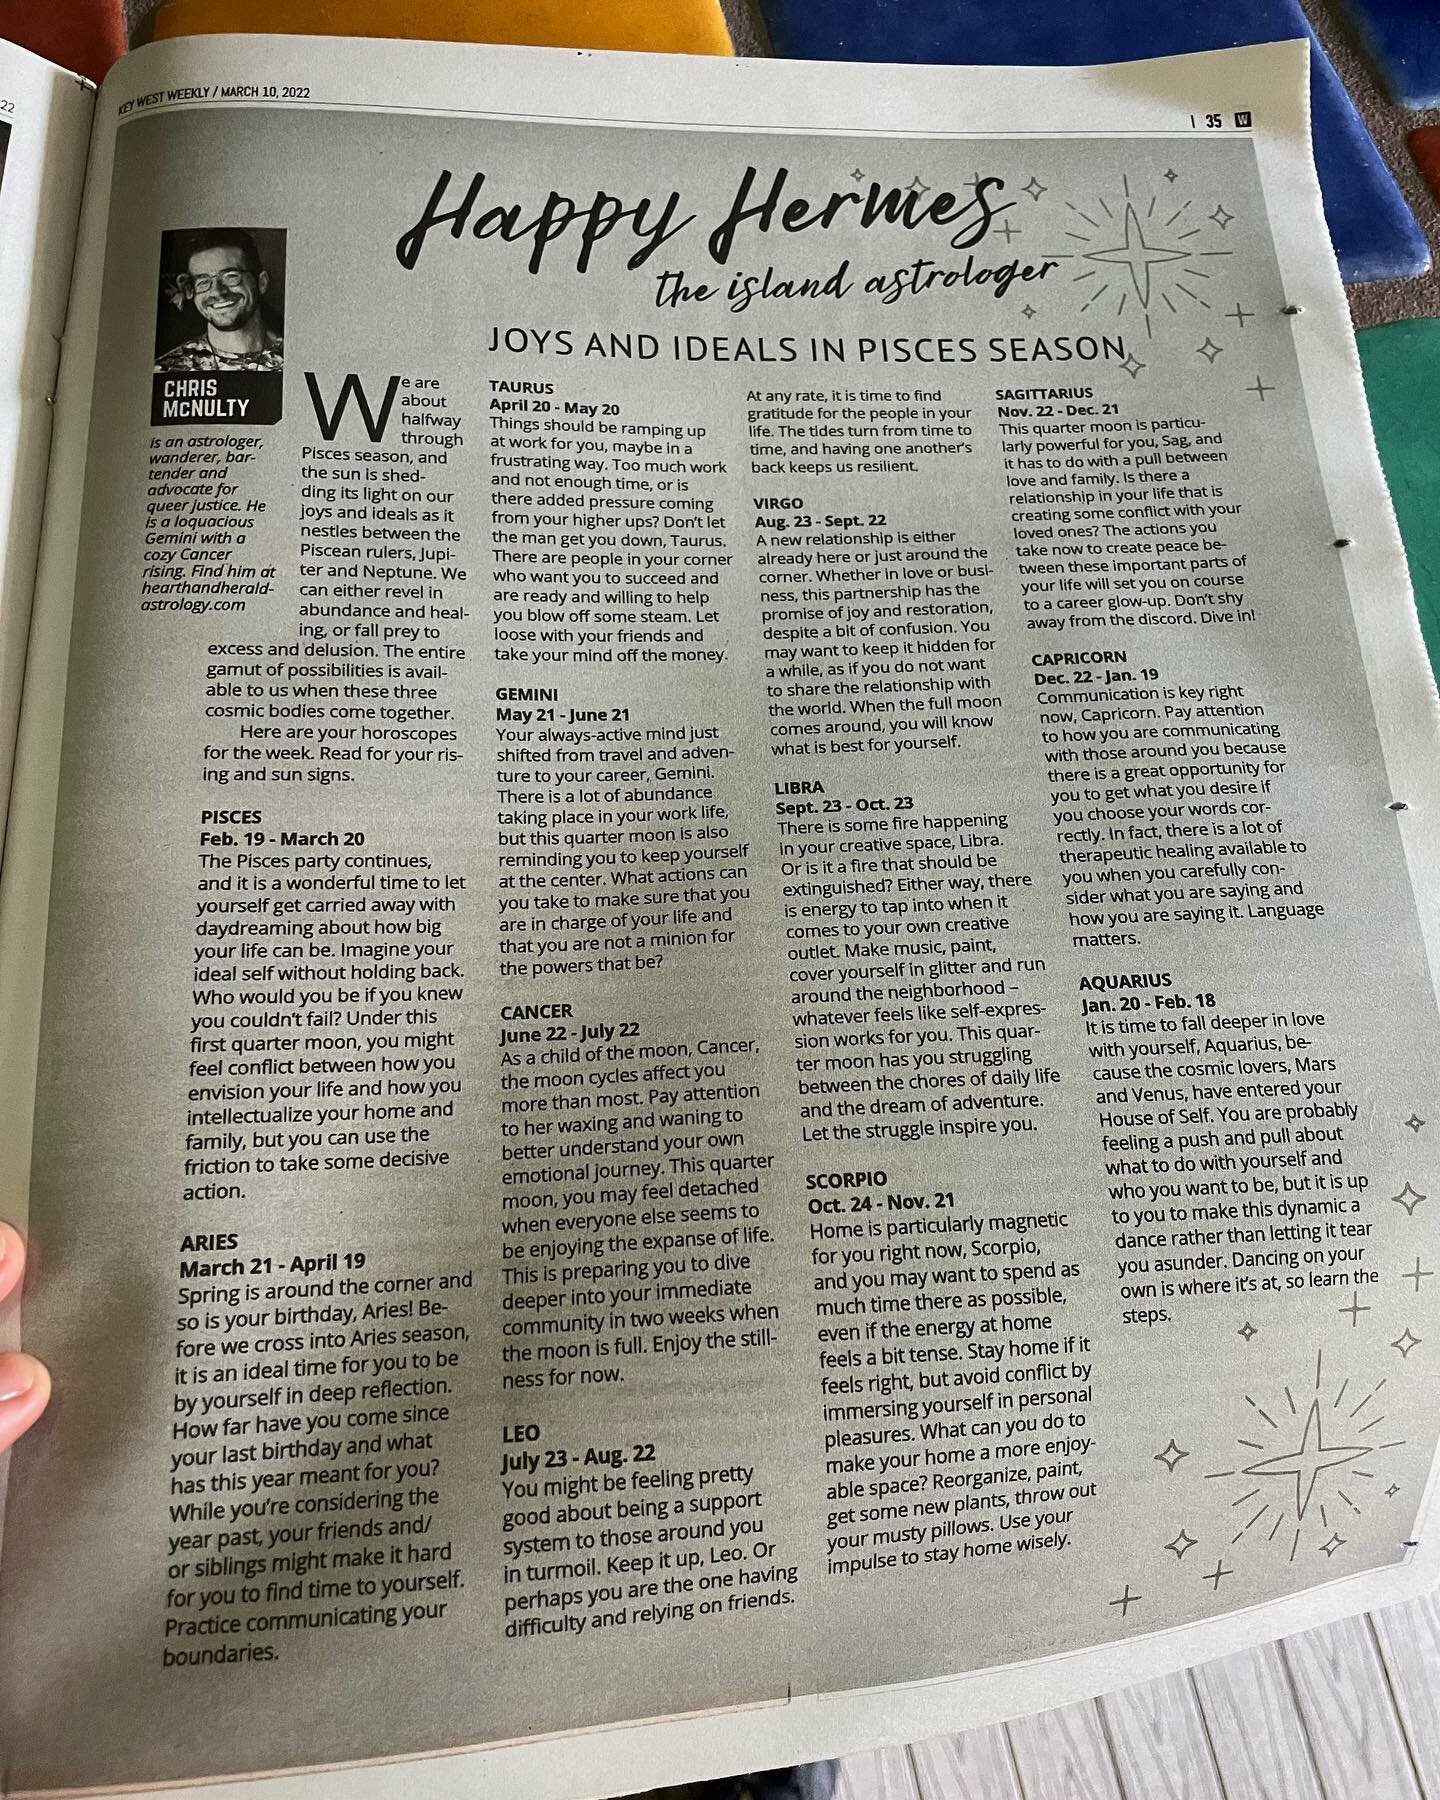 Here are your horoscopes from this past Thursday&rsquo;s @keysweekly. I hope they&rsquo;re helpful nuggets!